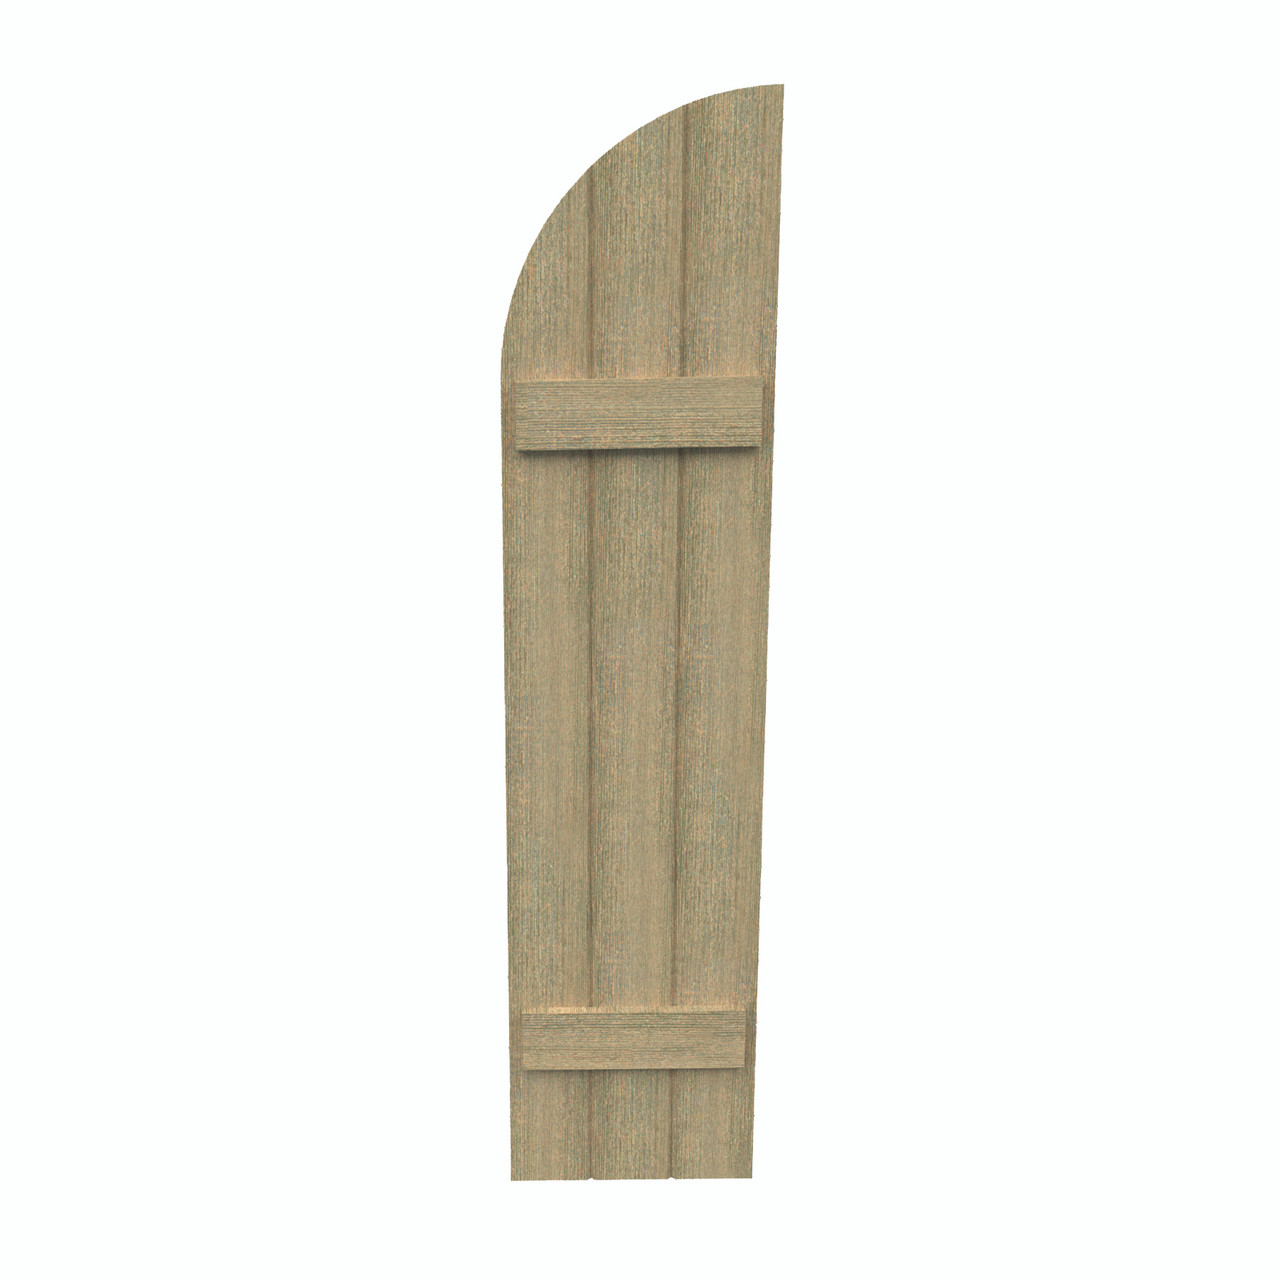 14 inch by 64 inch Quarter Round Shutter with 3-Boards